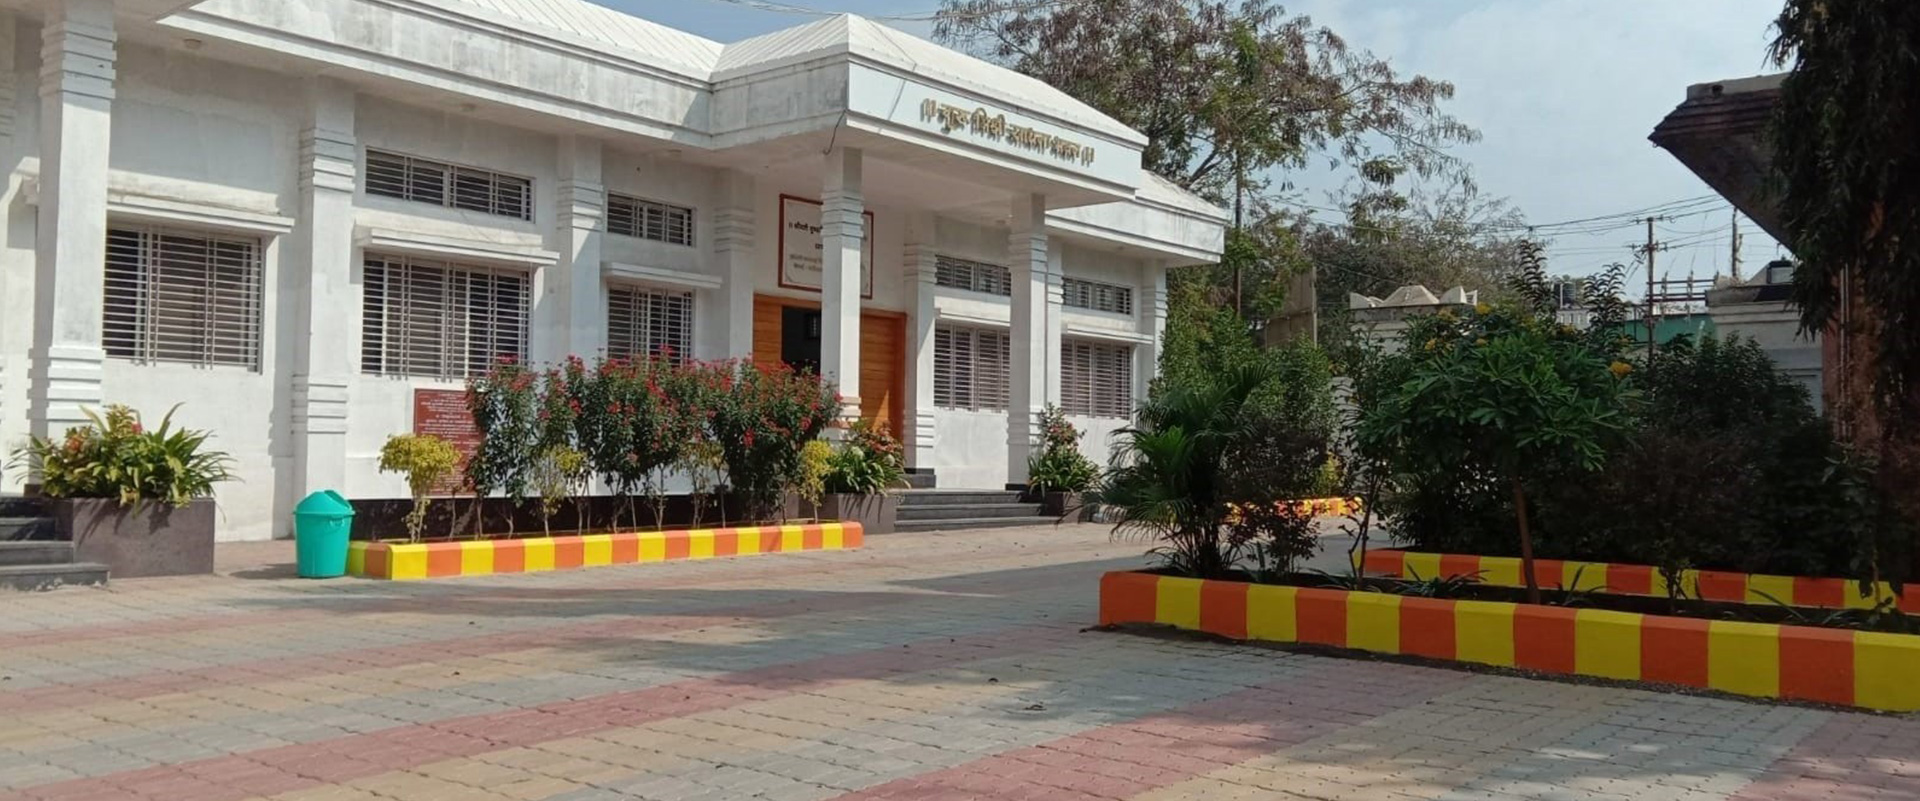 DKMM Homoeopathic Medical College Aurangabad Admission, Courses, Eligibility, Fees, Facilities